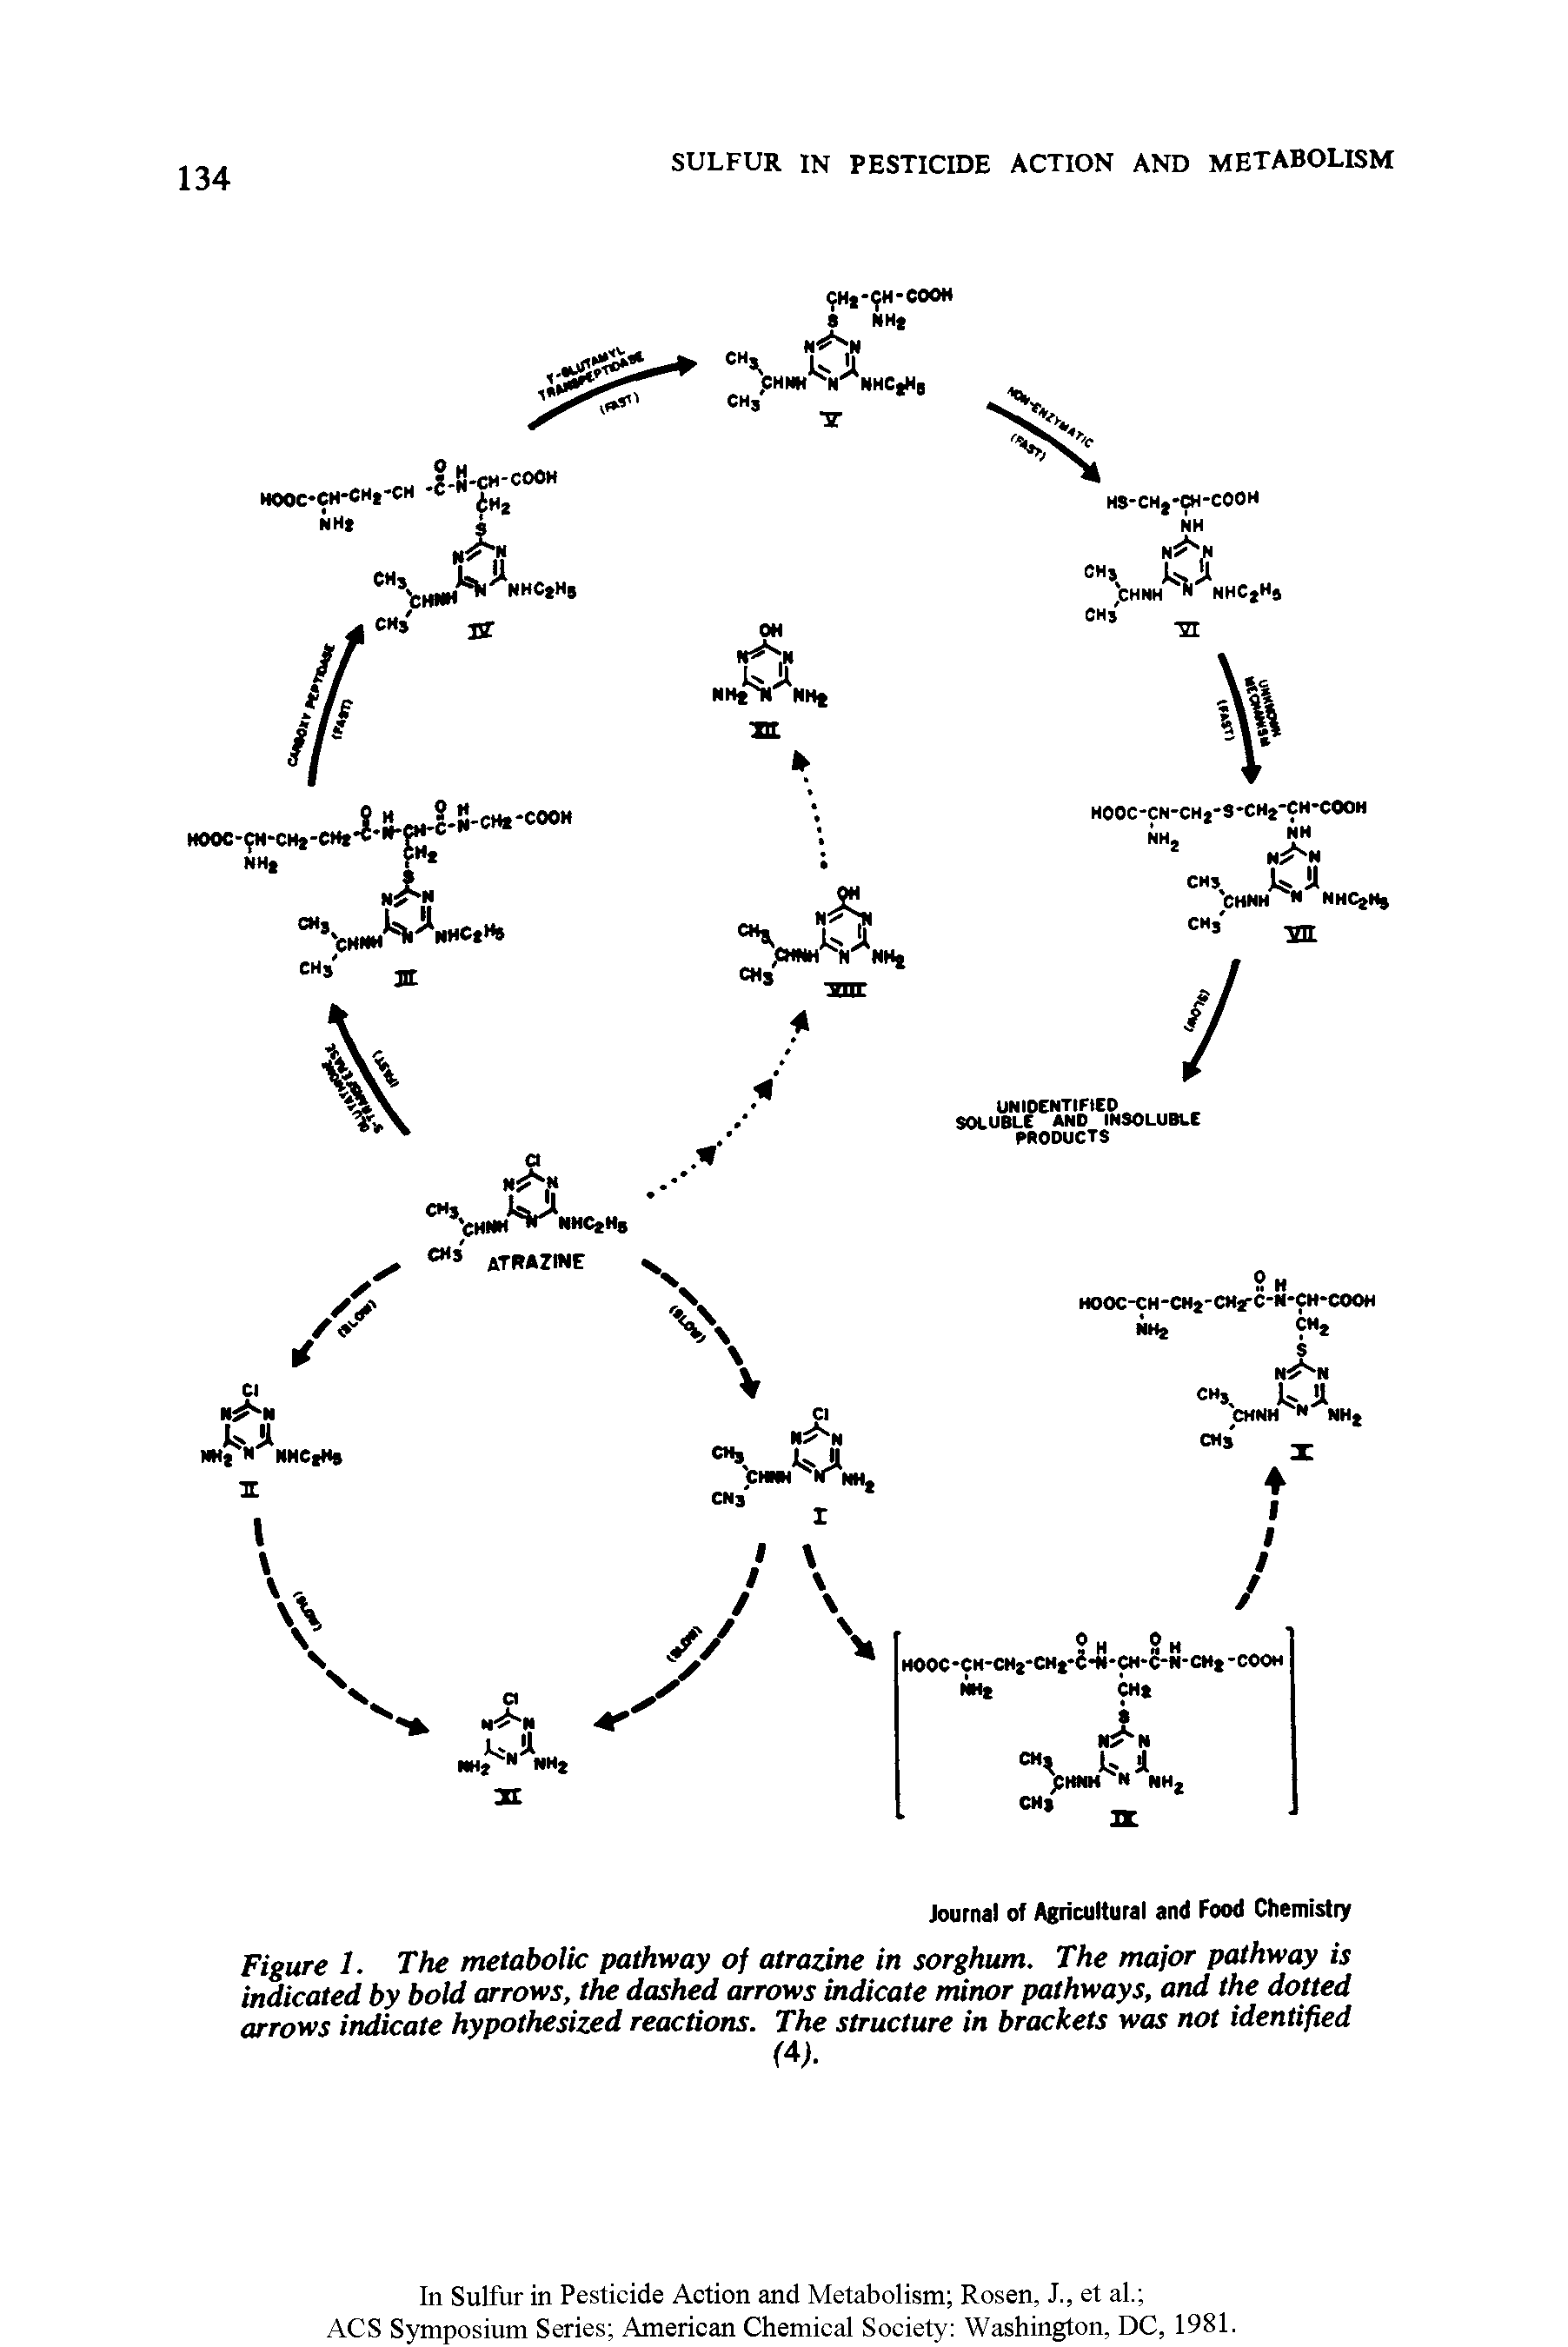 Figure 1. The metabolic pathway of atrazine in sorghum. The major pathway is indicated by bold arrows, the dashed arrows indicate minor pathways, and the dotted arrows indicate hypothesized reactions. The structure in brackets was not identified...